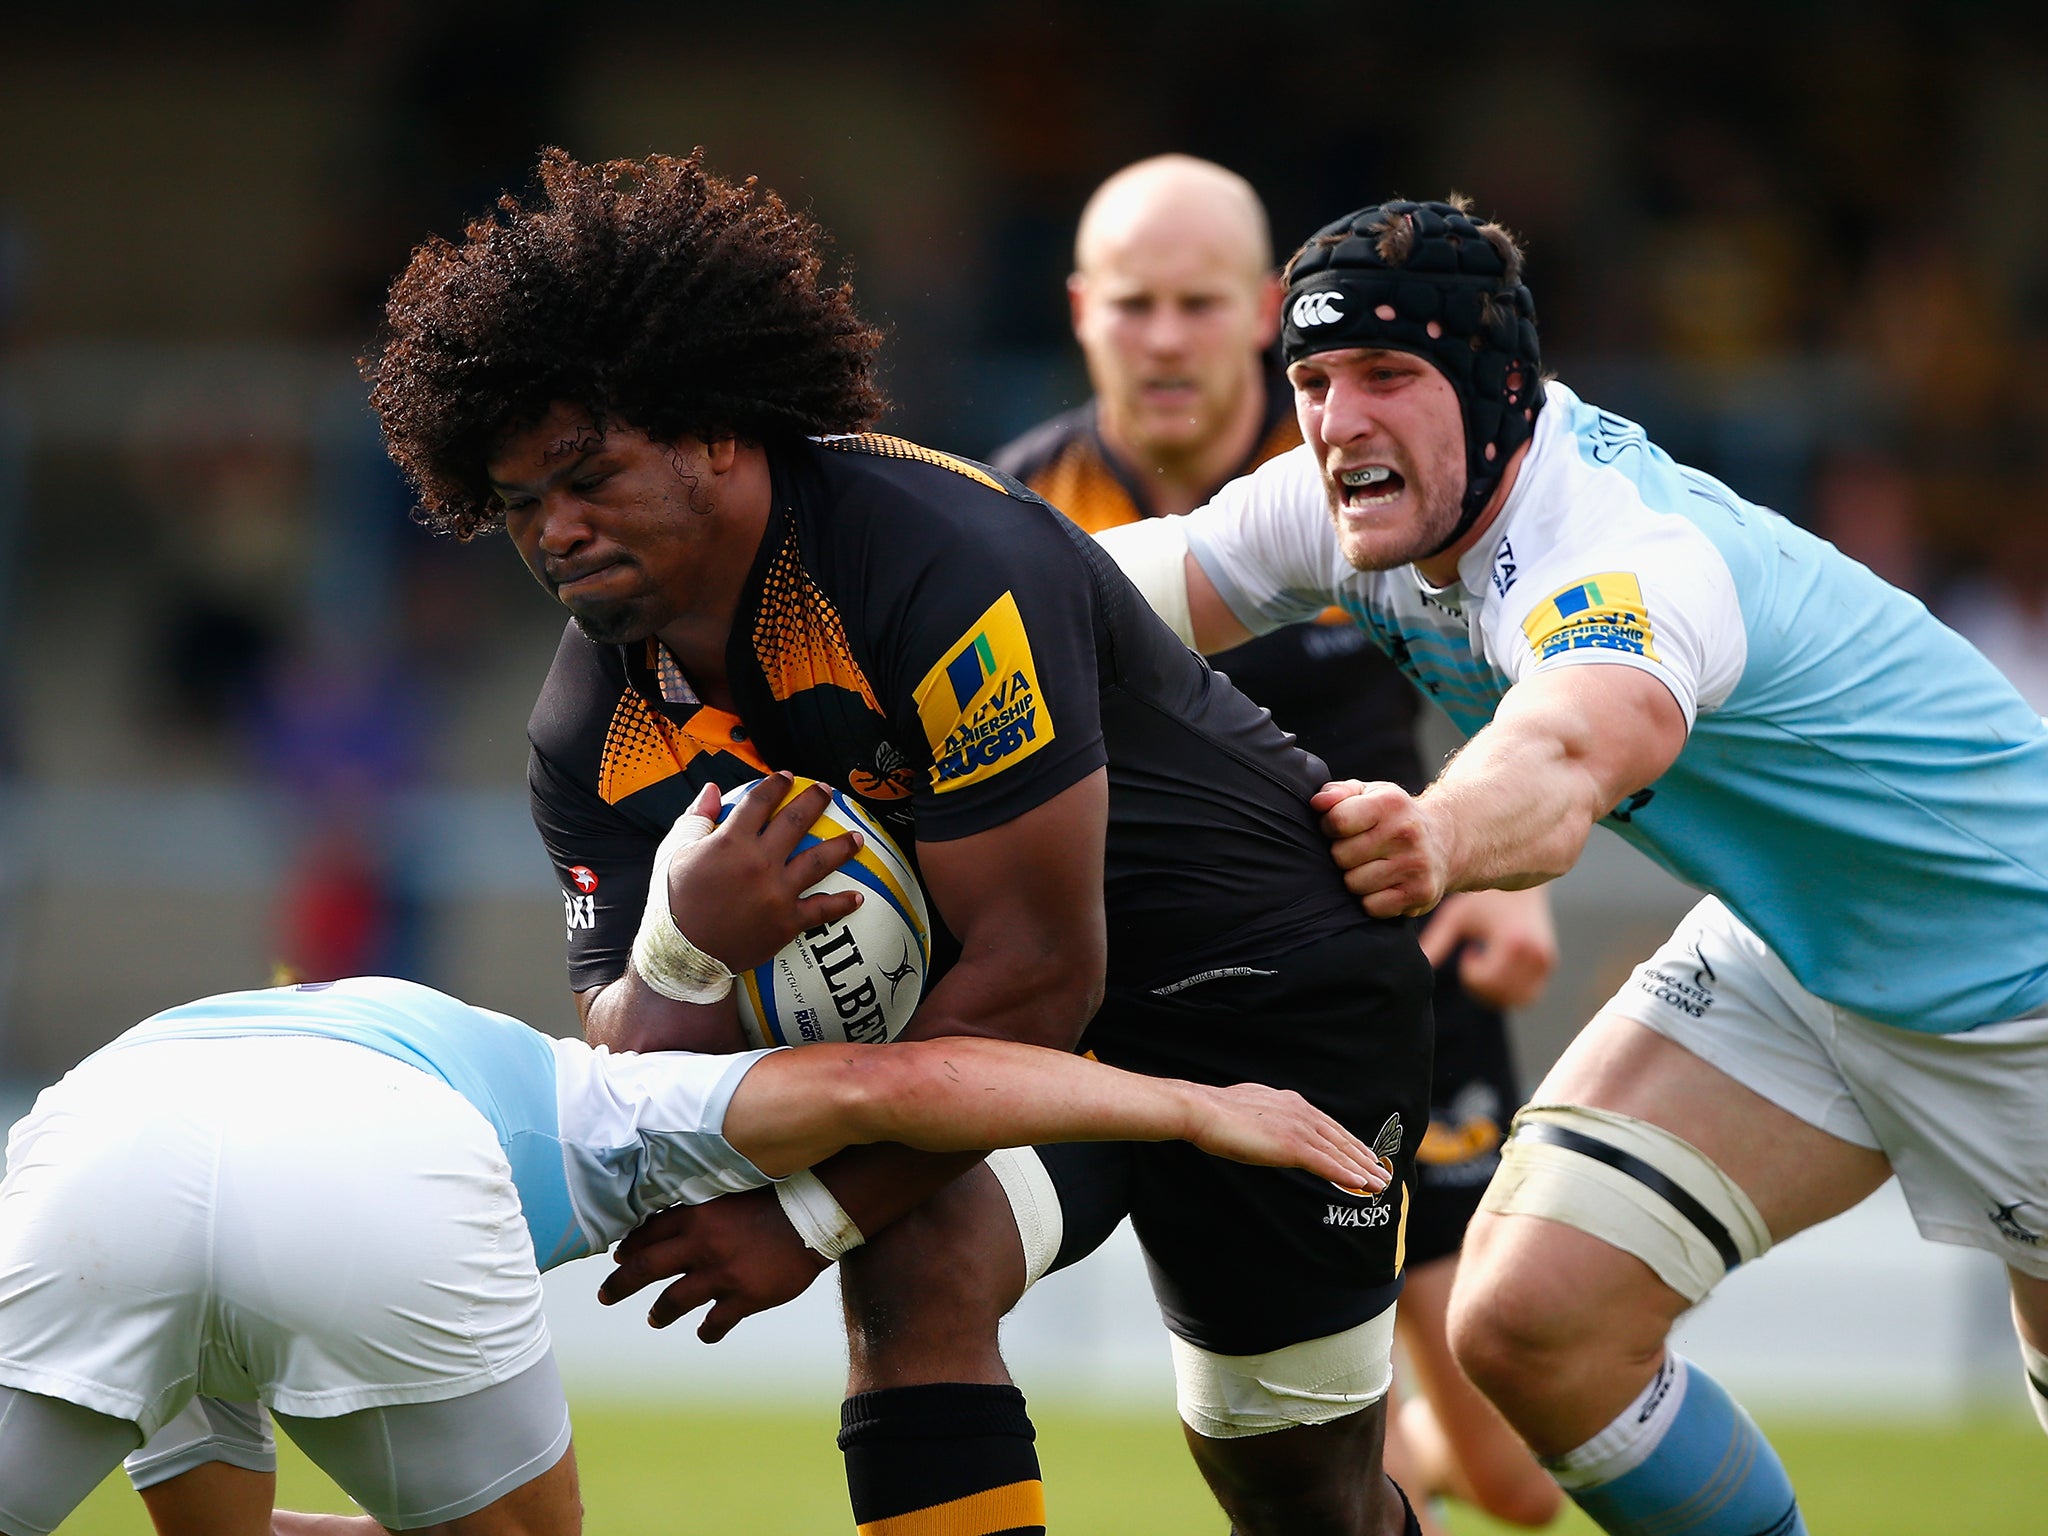 Ashley Johnson has been given a six-month ban for a failed drugs test